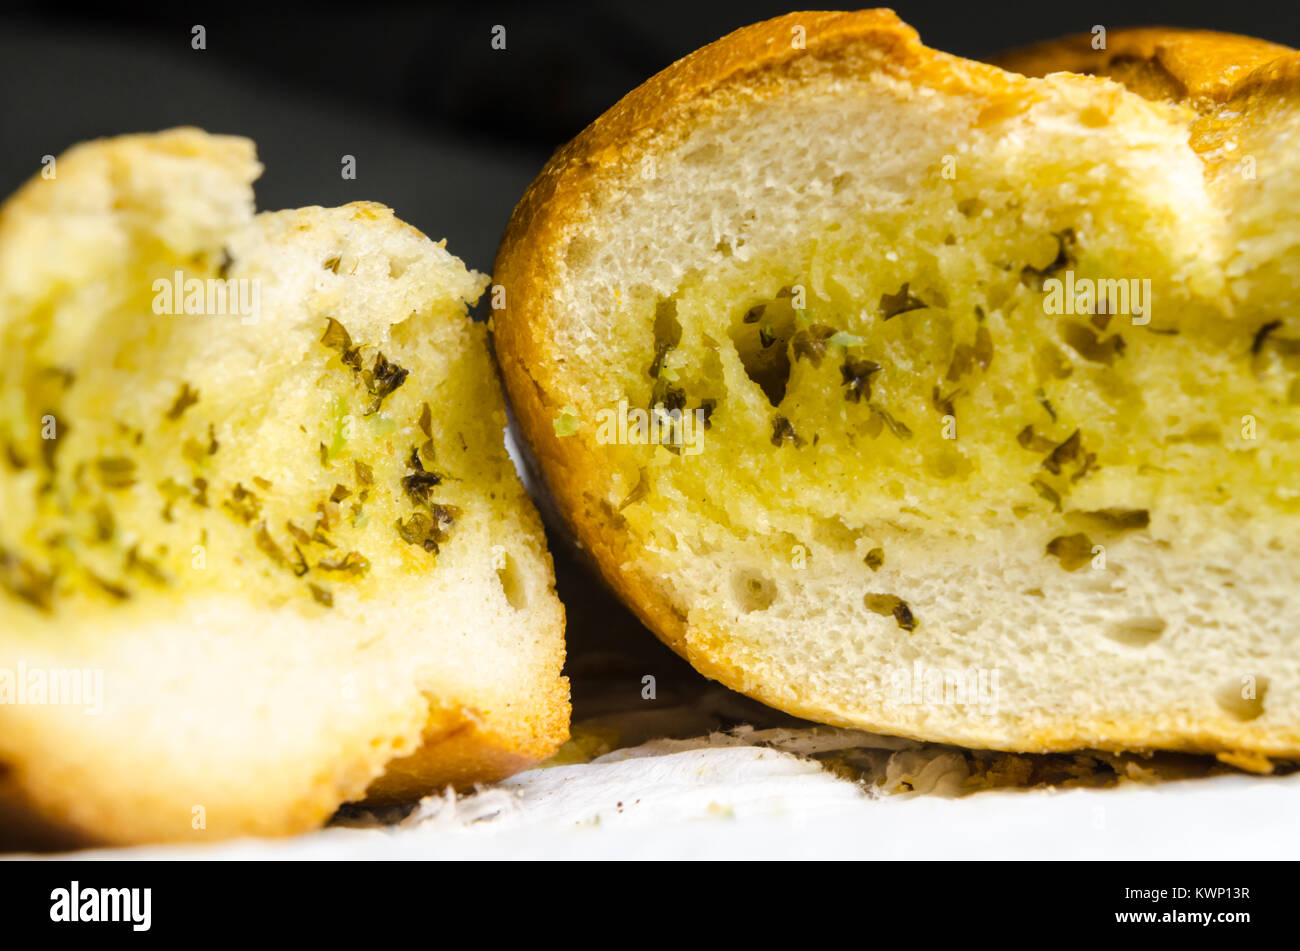 A Studio Photograph of Garlic Baguette Ready To Eat Stock Photo